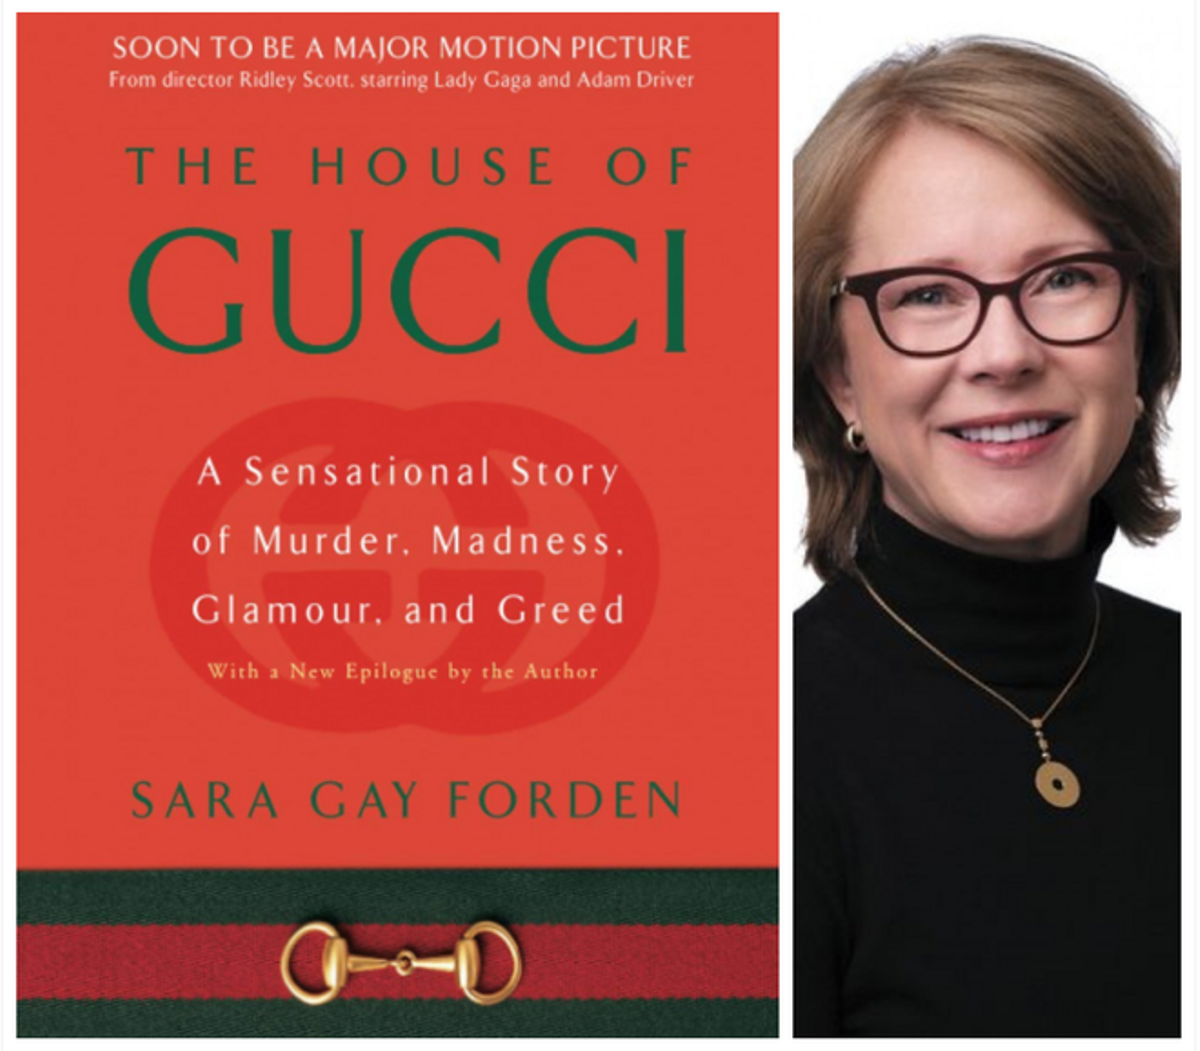 Portada del libro House of Gucci: A Sensational Story of Murder, Madness, Glamour, and Greed y su autora, Sara Gay Forden